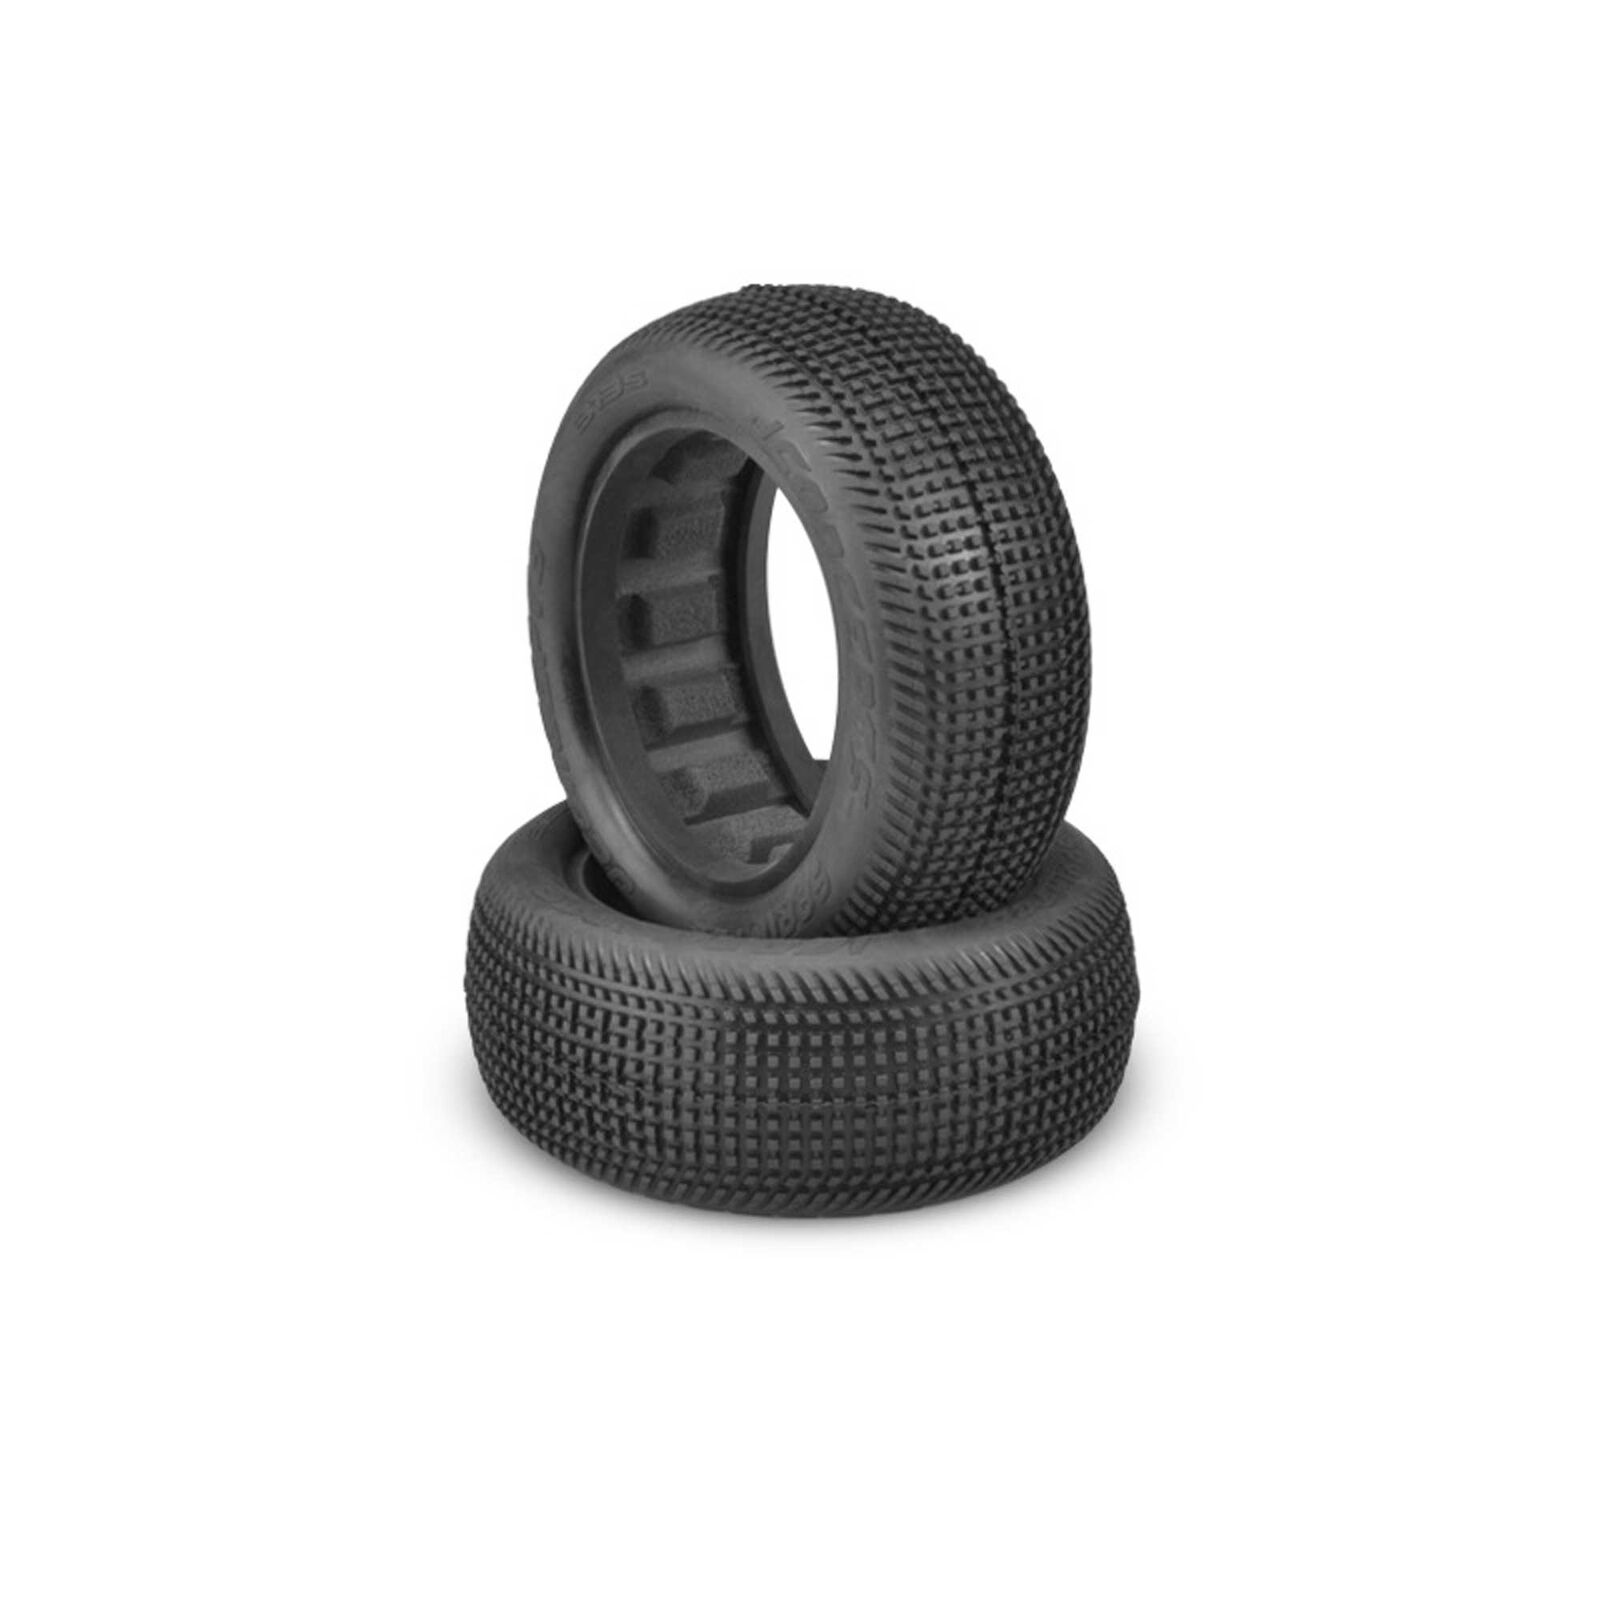 1/10 Sprinter 2.2” Front 4x4 Buggy Tires and Inserts, Green Compound (2)